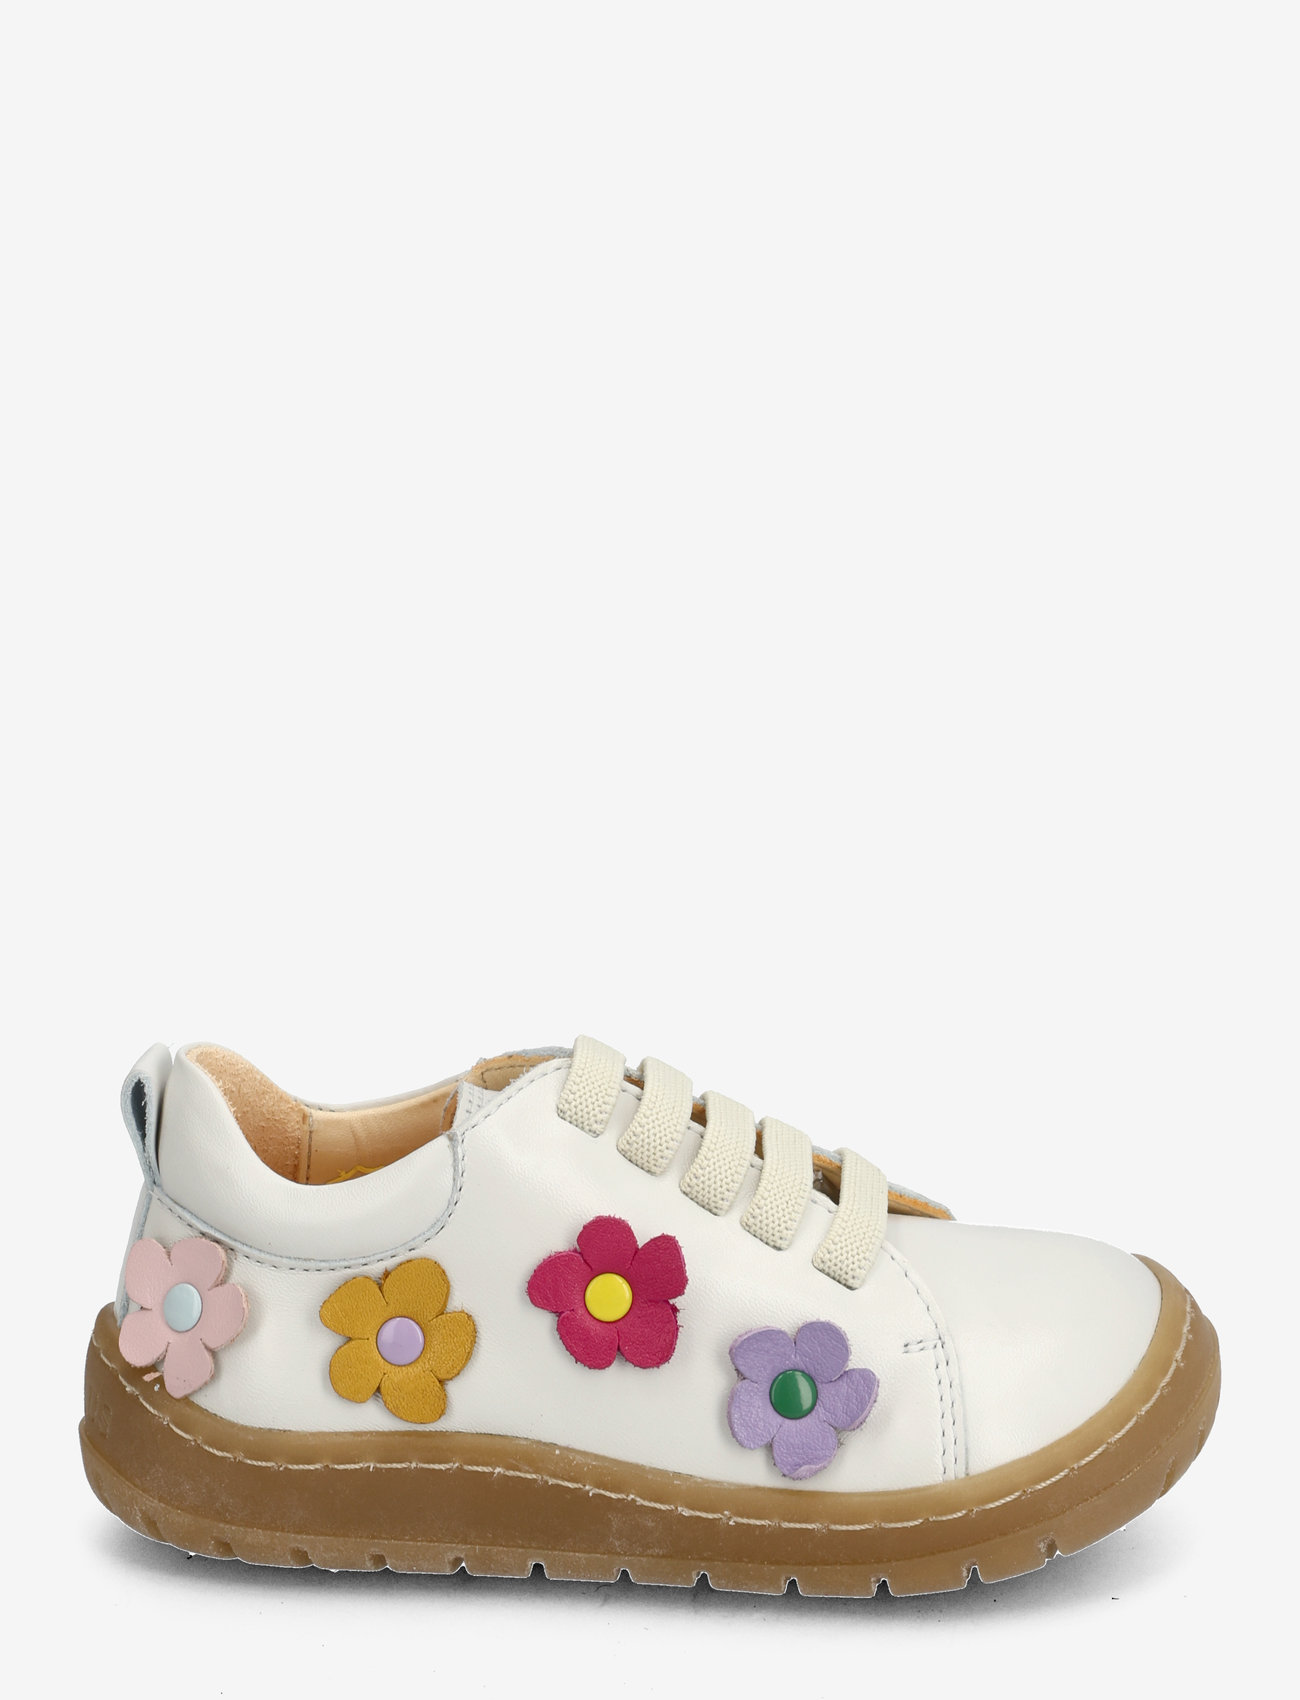 ANGULUS - Shoes - flat - with lace - zomerkoopjes - 1493/a002 off white/flowers - 1